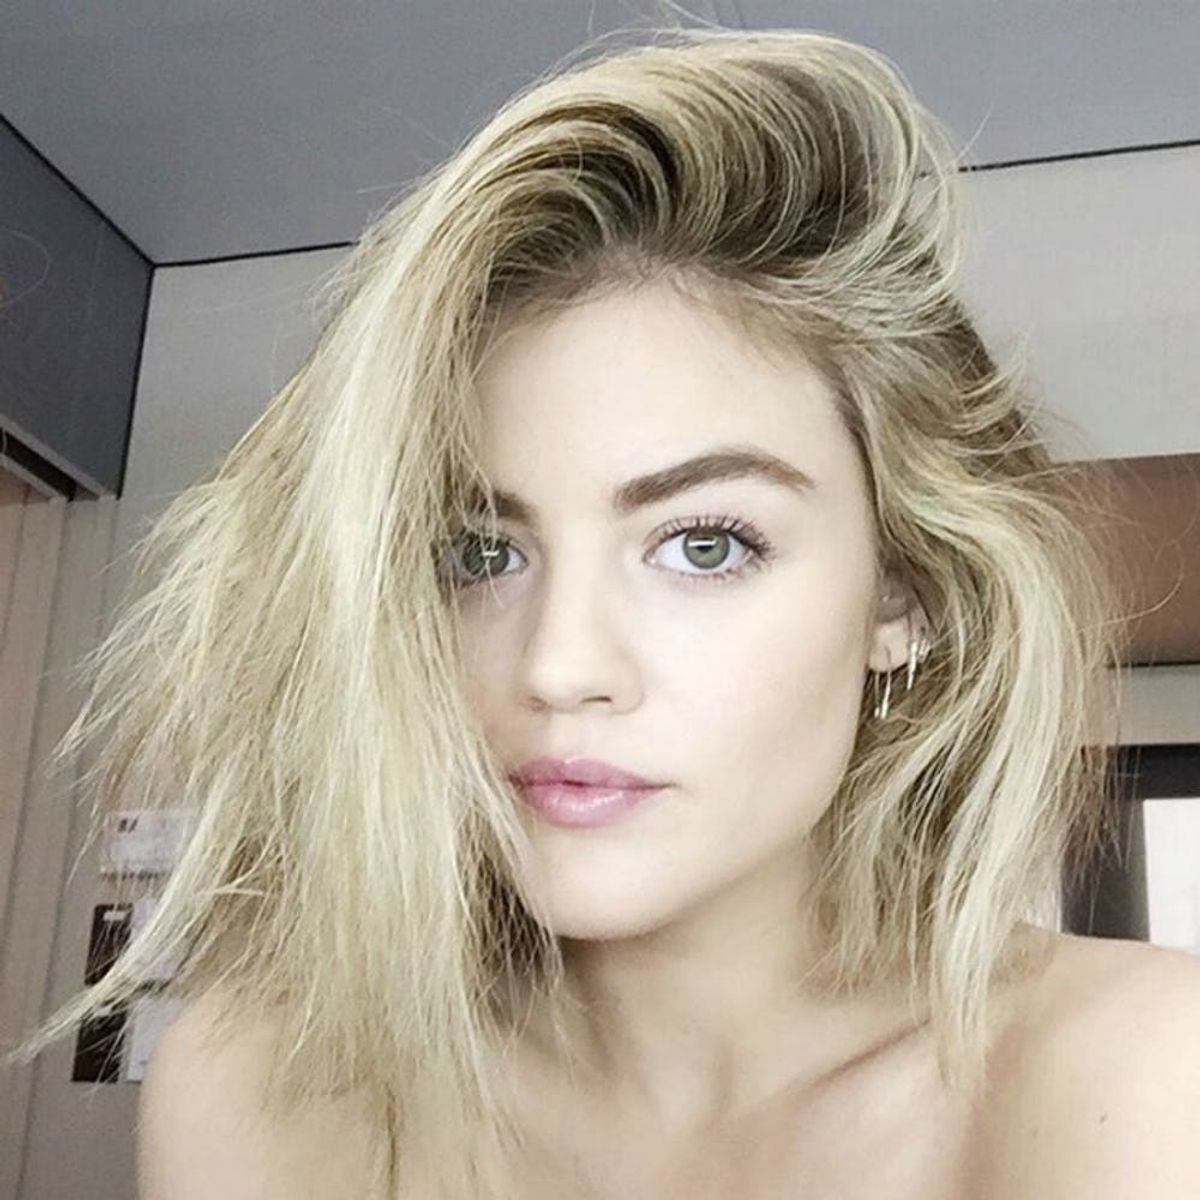 Lucy Hale Has Changed Her Hair YET AGAIN